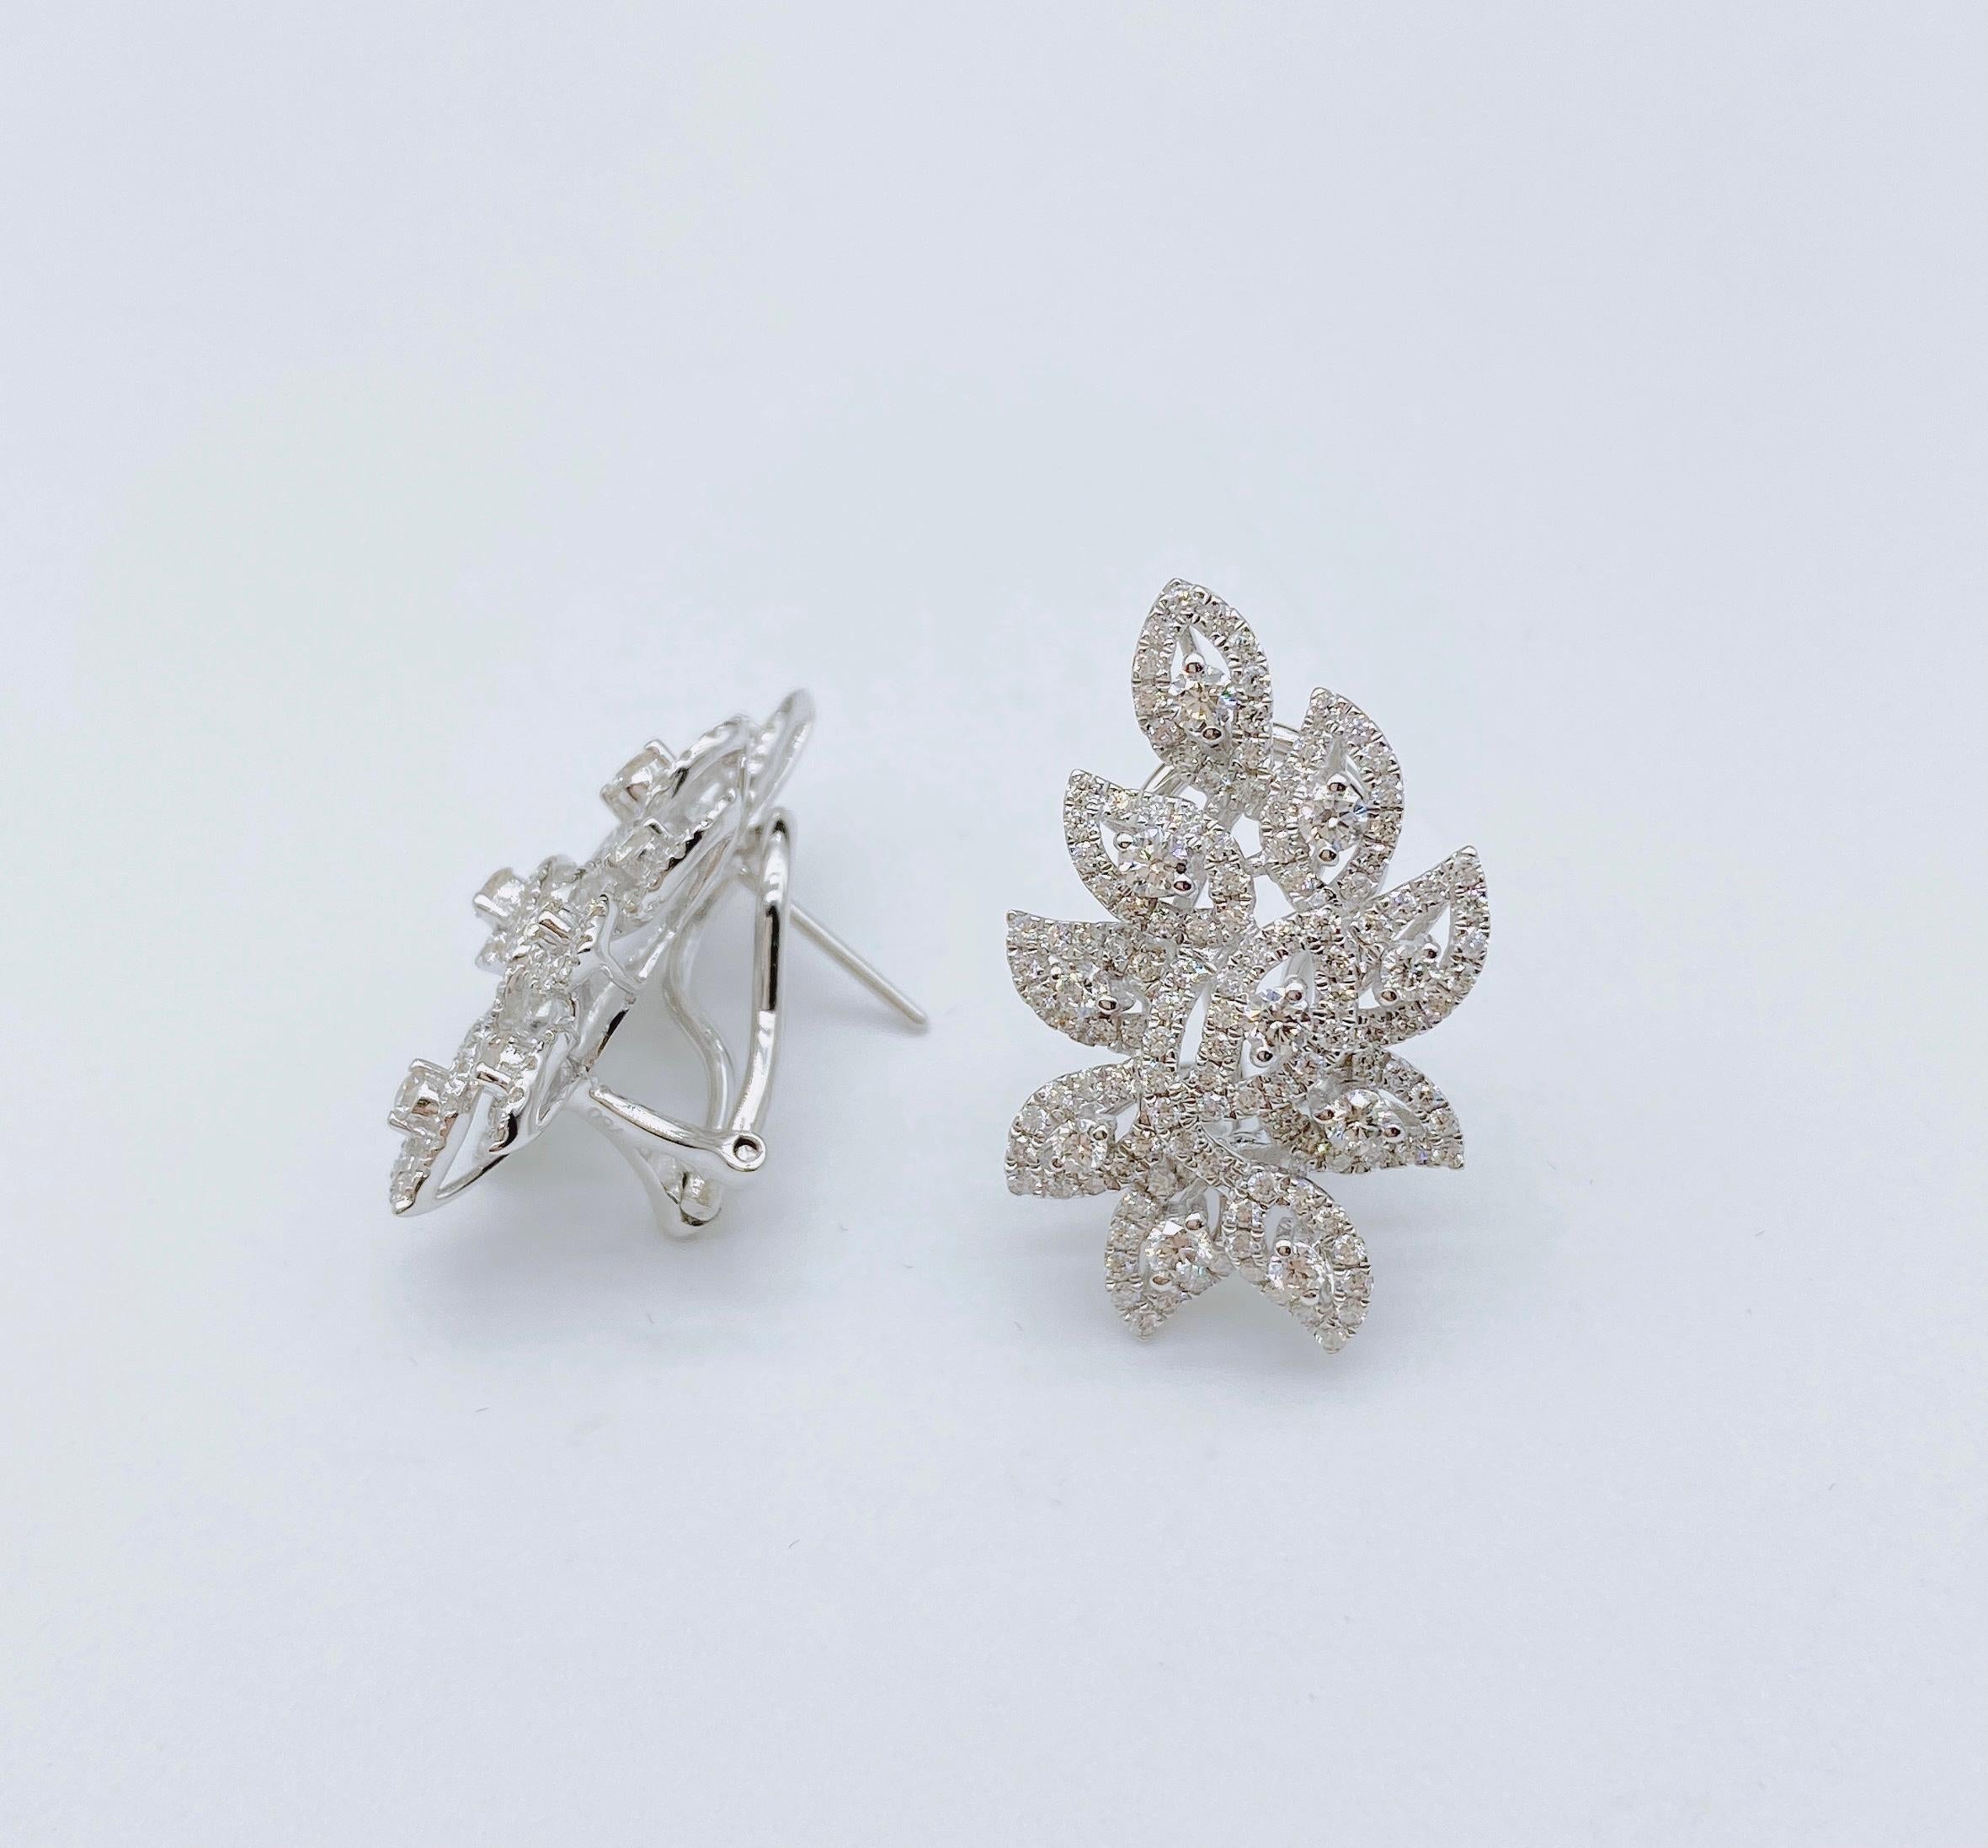 The Following Items we are offering is a Rare Important Radiant 18KT Yellow Gold and 18KT Gold Gorgeous Glittering Leaf Diamond Dangle Earrings. Earrings Feature Gorgeous Rare Fancy Diamonds Framed with Spectacular Glittering Round Diamonds in the